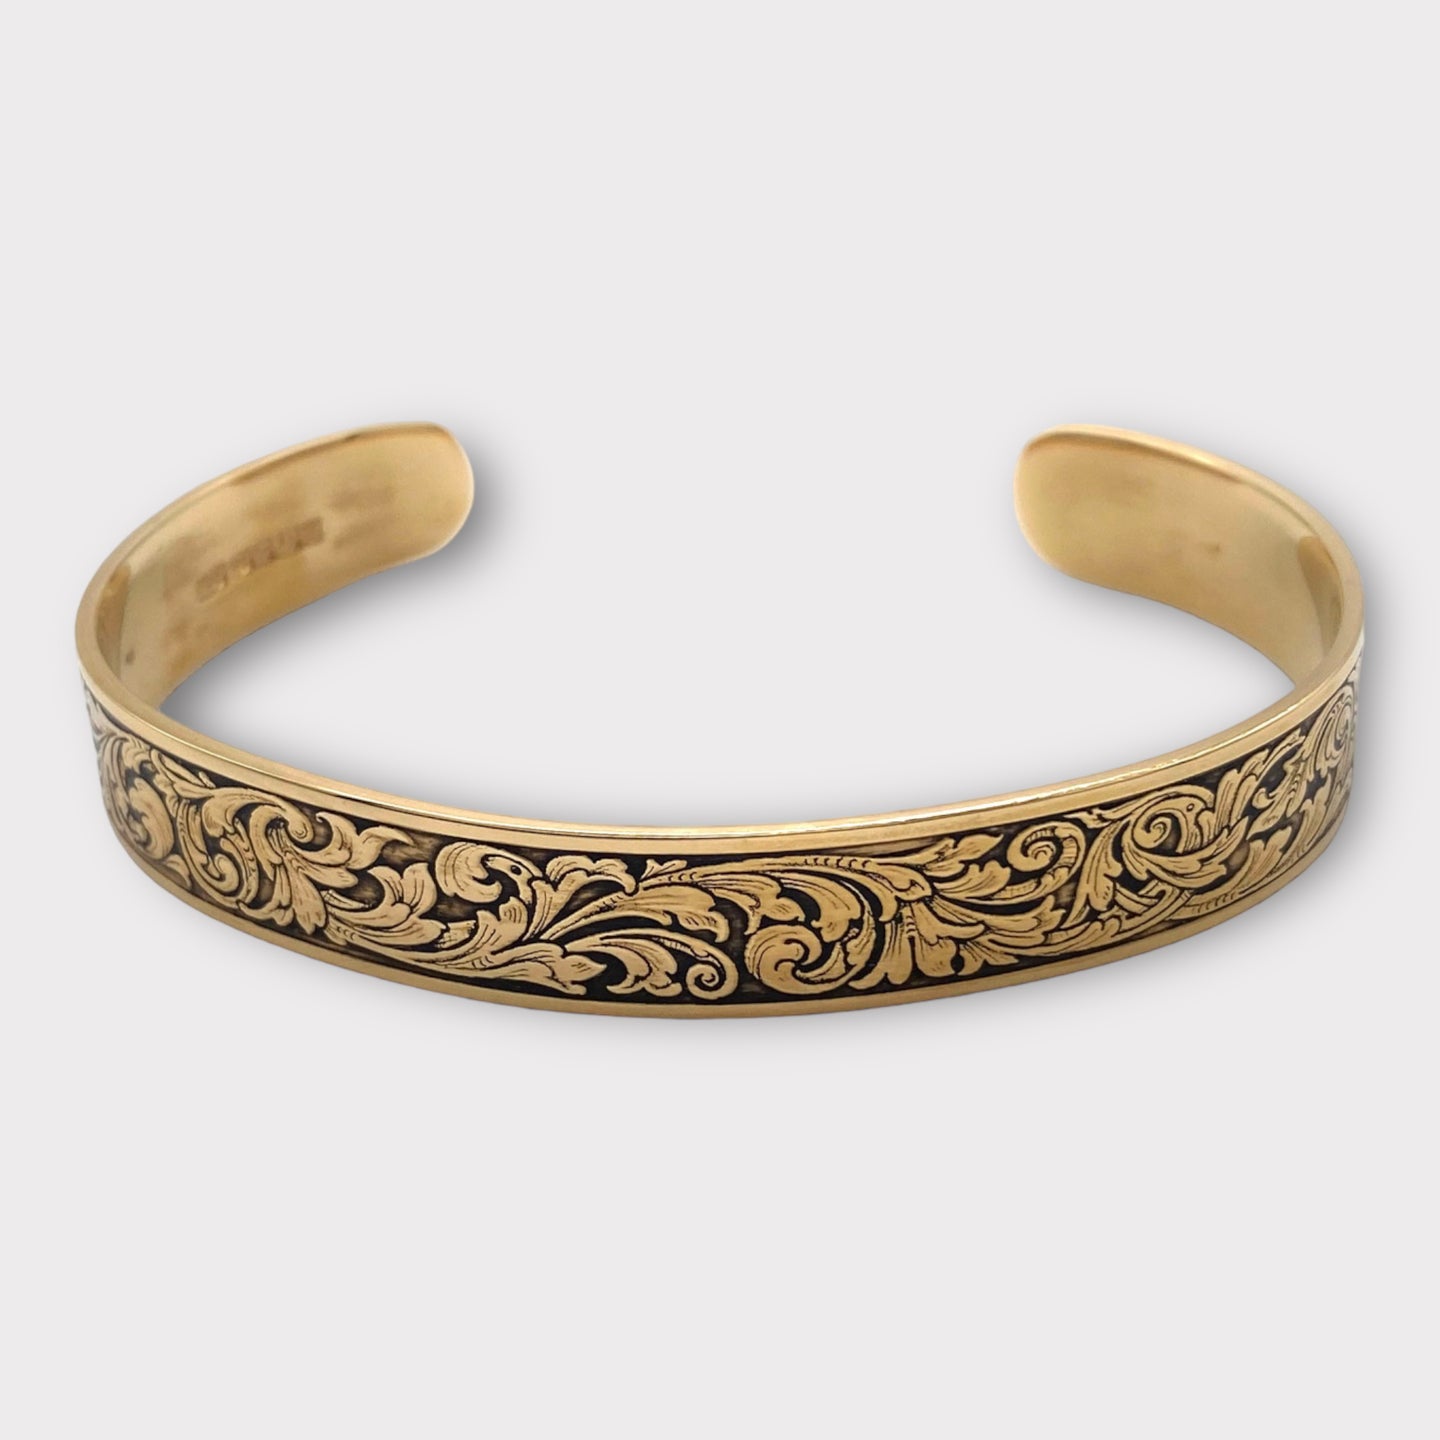 Engraved gold vermeil bangle bracelet with scroll gun hand engraving style by Ken Hunt